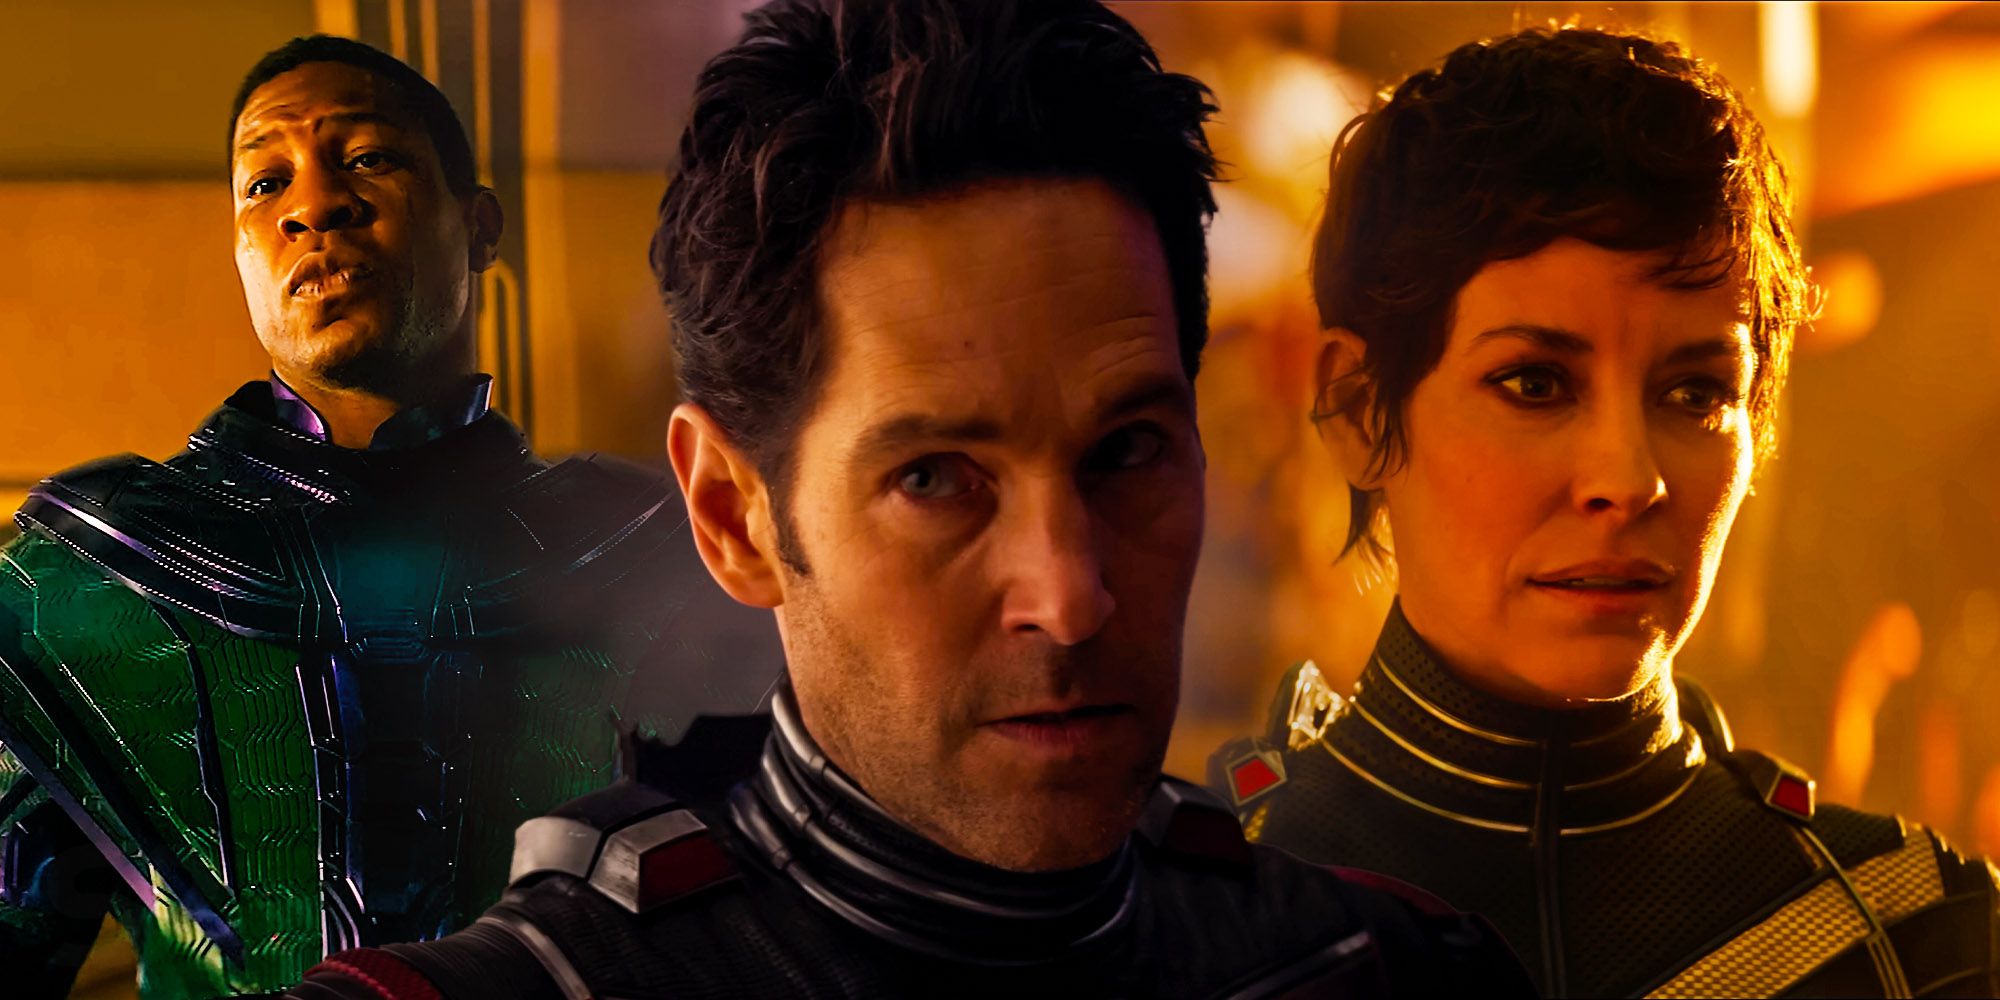 Kang, Scott Lang and Hope van Dyne in Ant-Man and the Wasp Quantumania